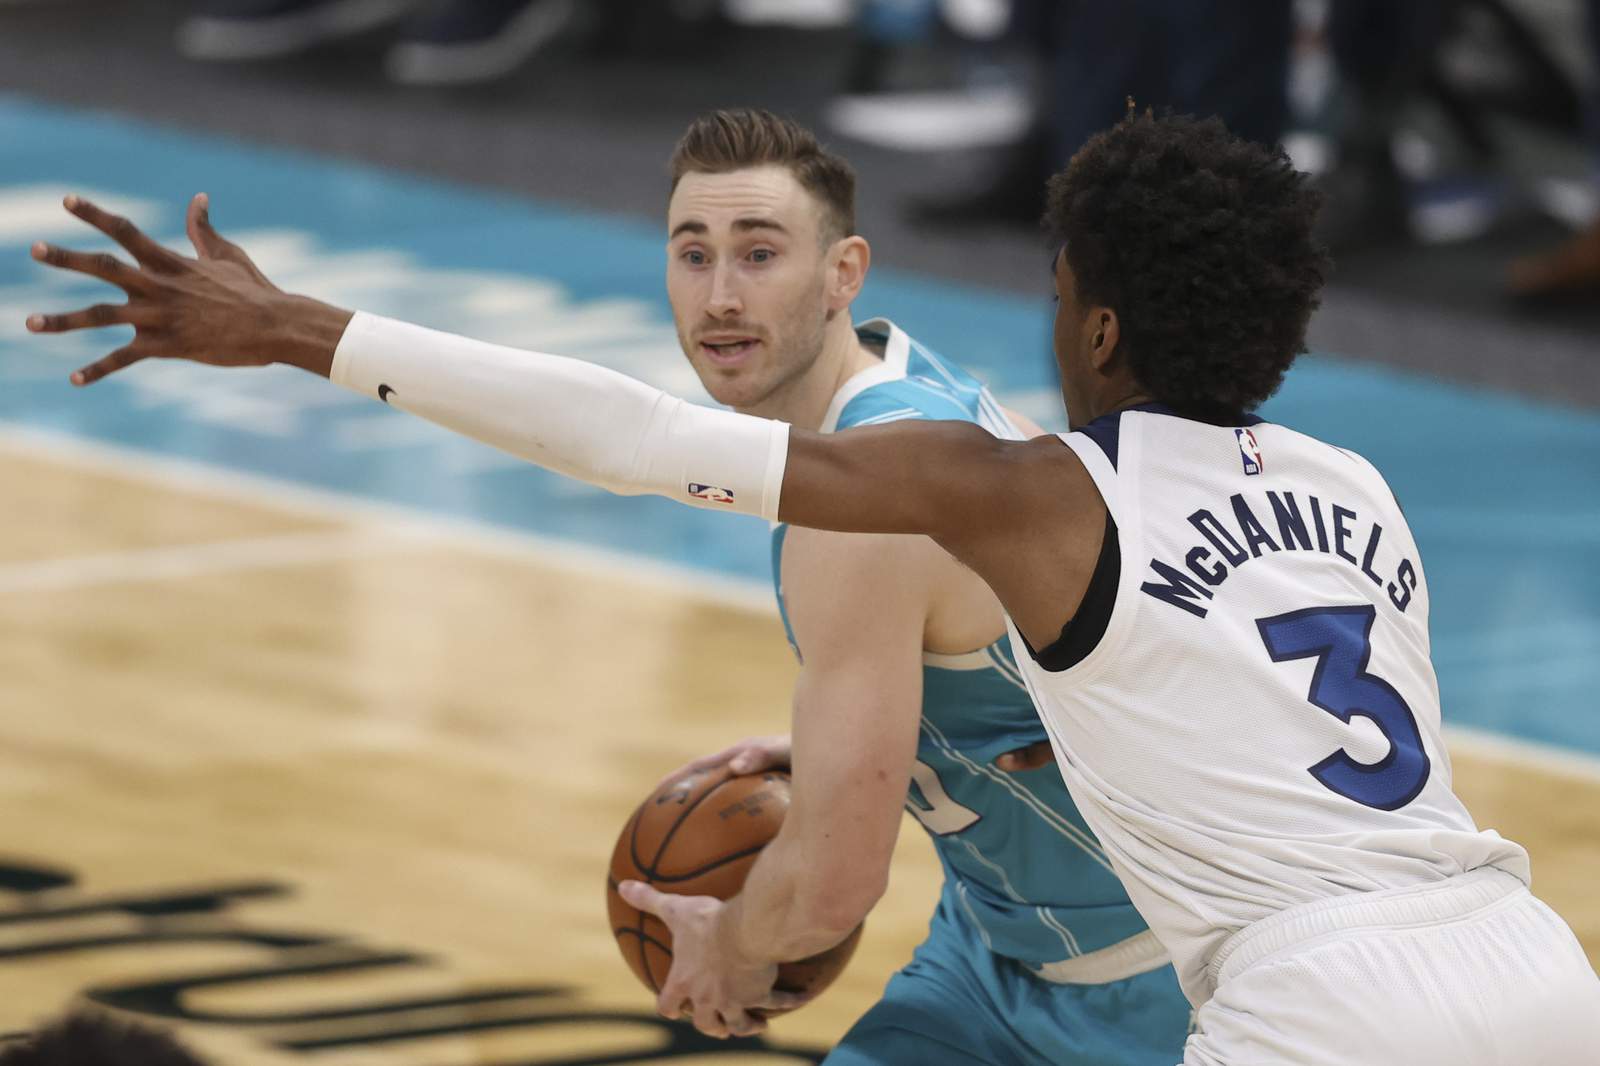 Hayward finding success in more prominent role with Hornets